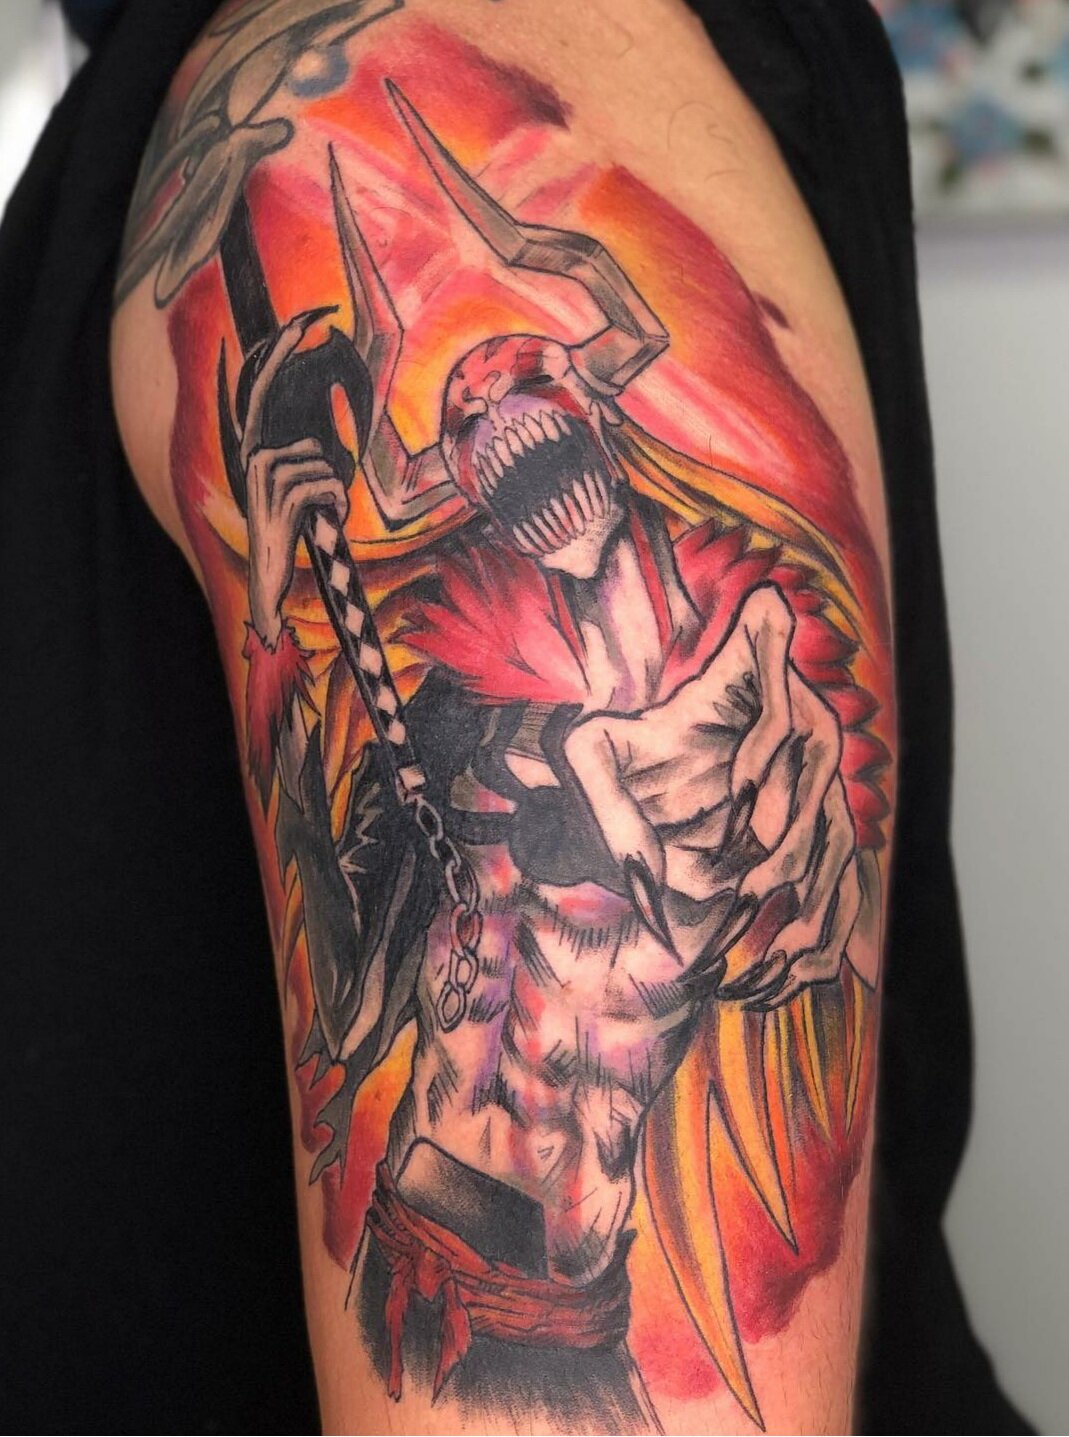 Arcane Tattoos  Ichigo tattoo from BLEACH by Dj We have time to tattoo  today Come have a chat about your next tattoo  Facebook